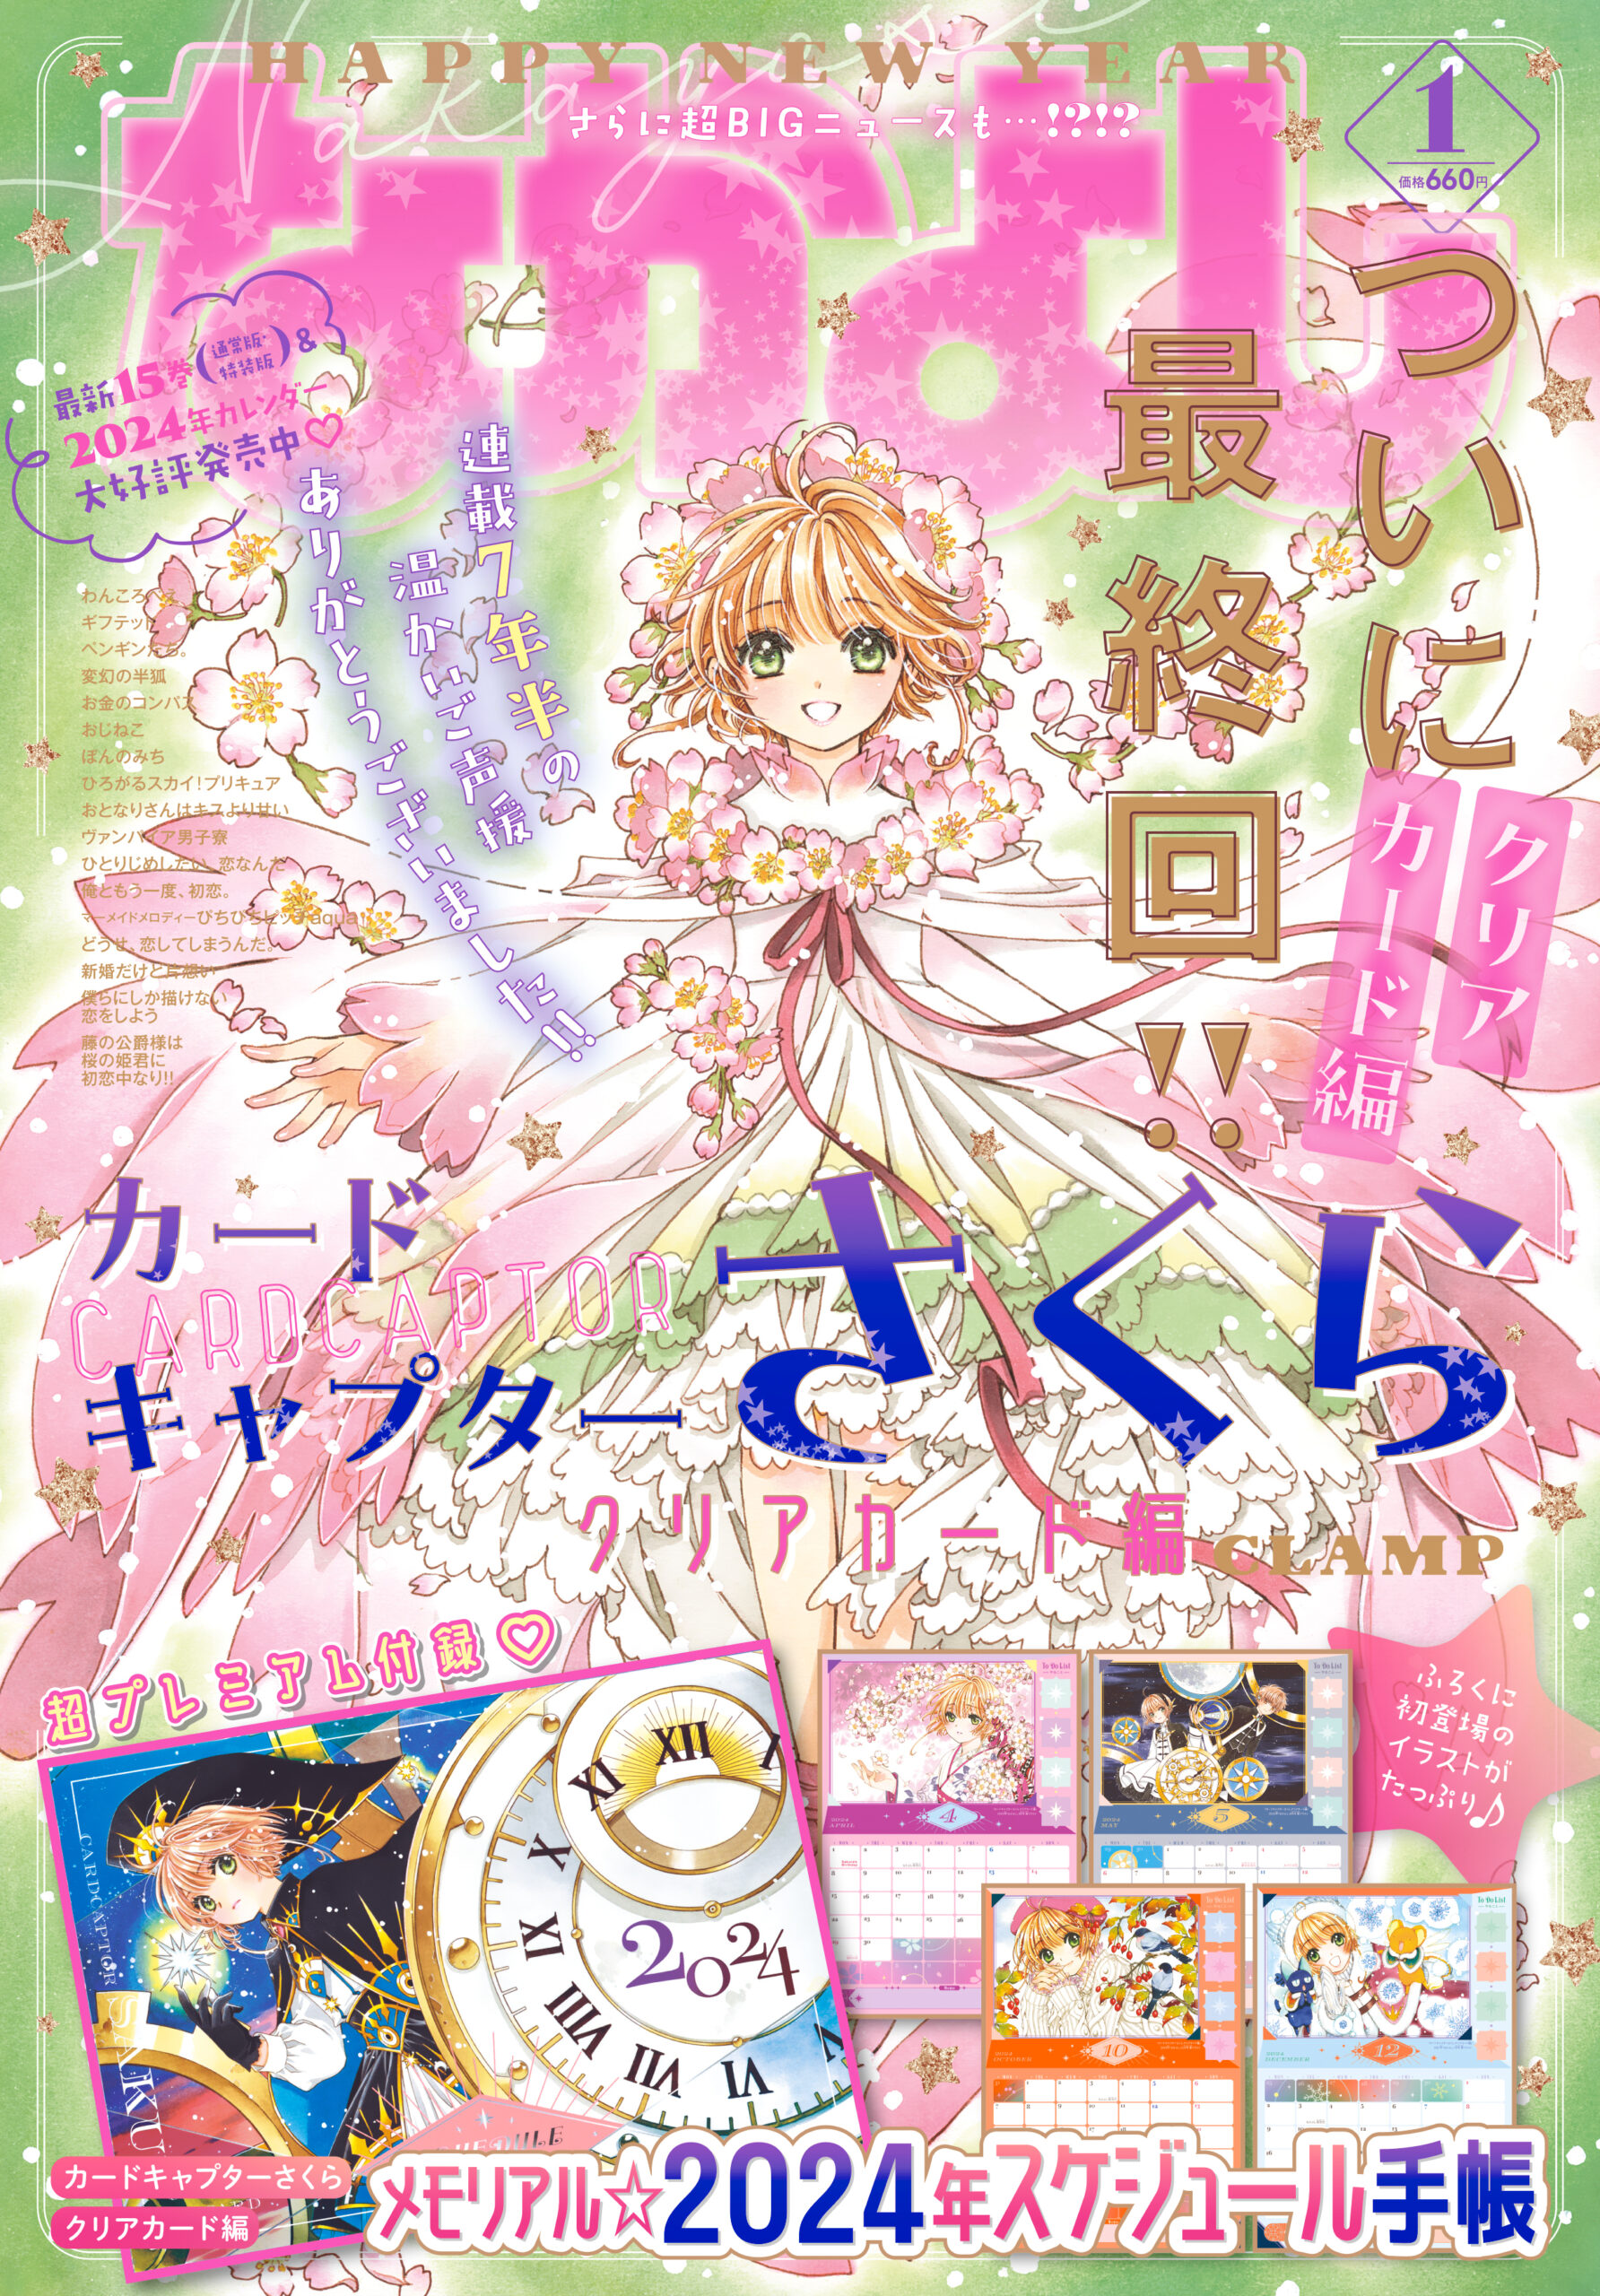 CLAMP PREMIUM COLLECTION」4th seriesが『X -エックス-』に決定 